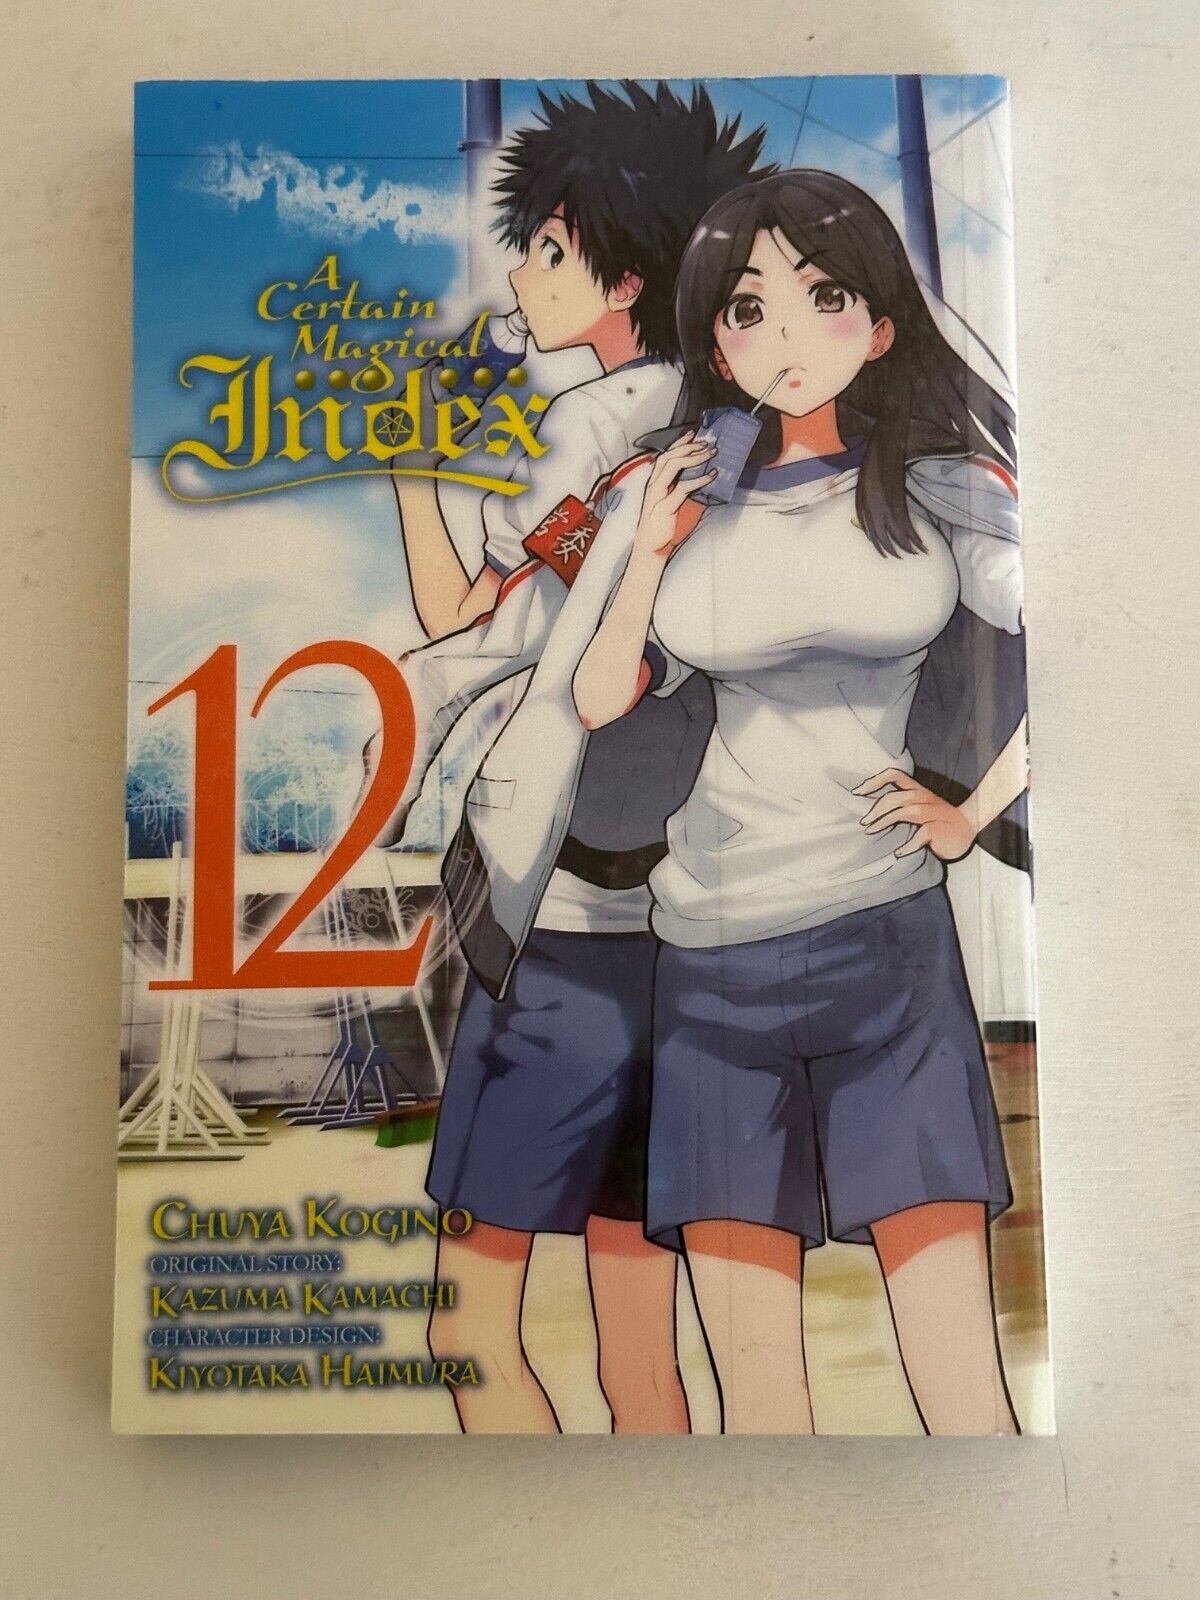 A Certain Magical Index, Vol. 12 Magna English (Paperback) Ex-Library